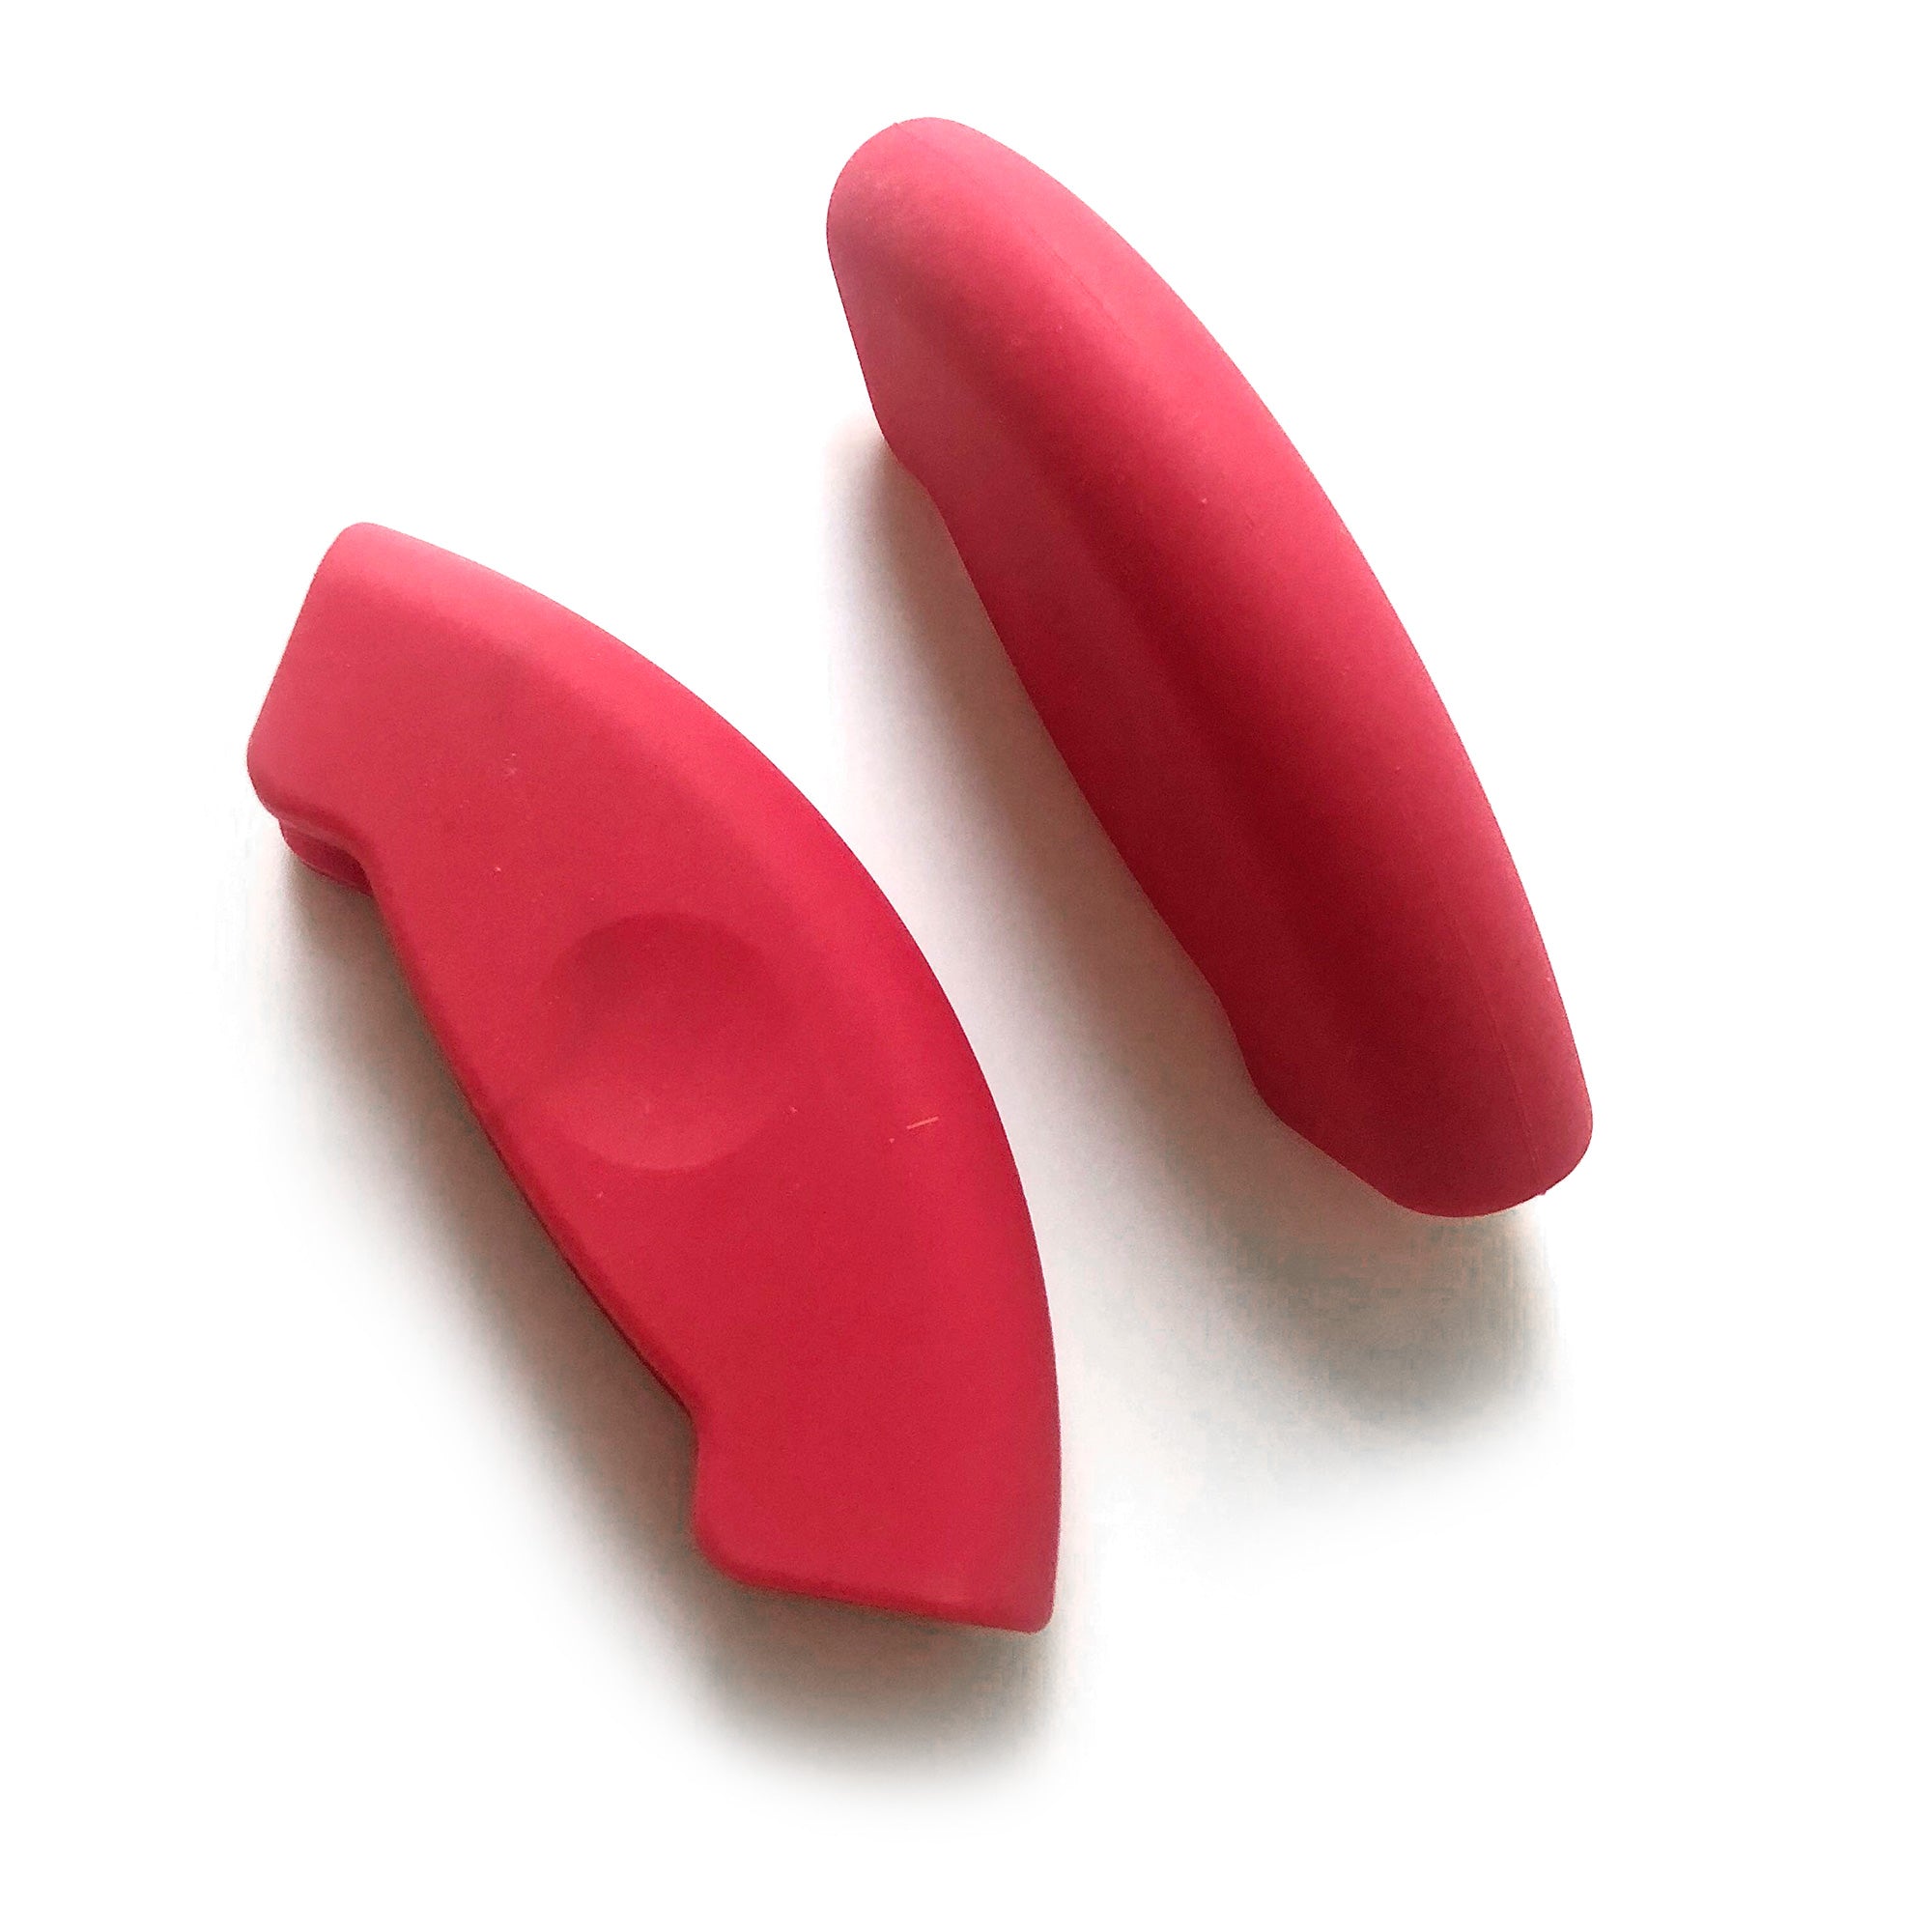 Silicone Handles for The Whatever Pan – Jean Patrique Professional